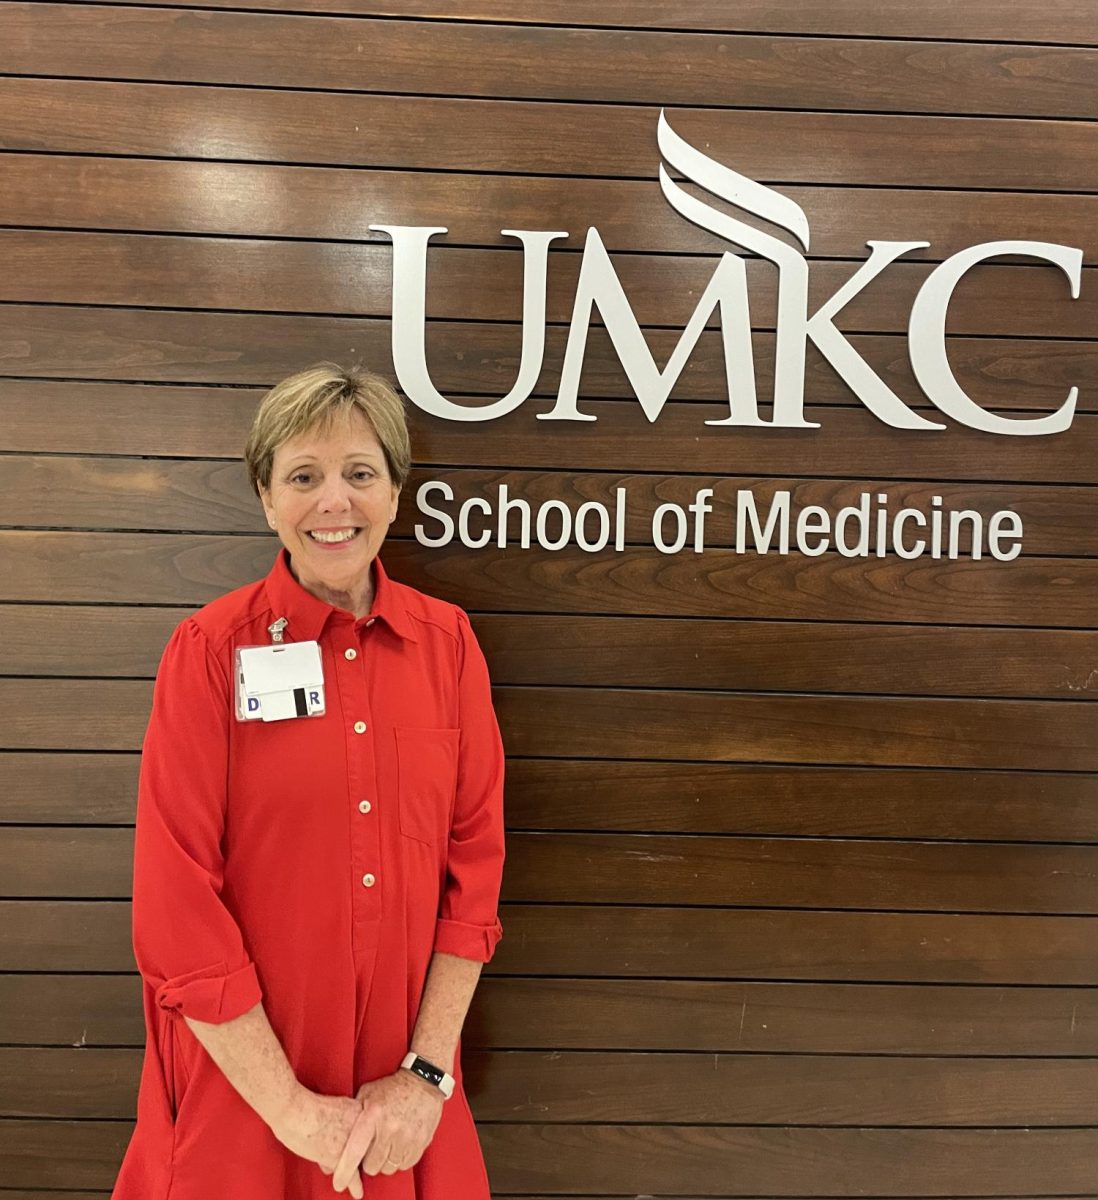 Jackson+is+a+UMKC+School+of+Medicine+alumna+and+currently+serving+her+sixth+year+as+dean.+